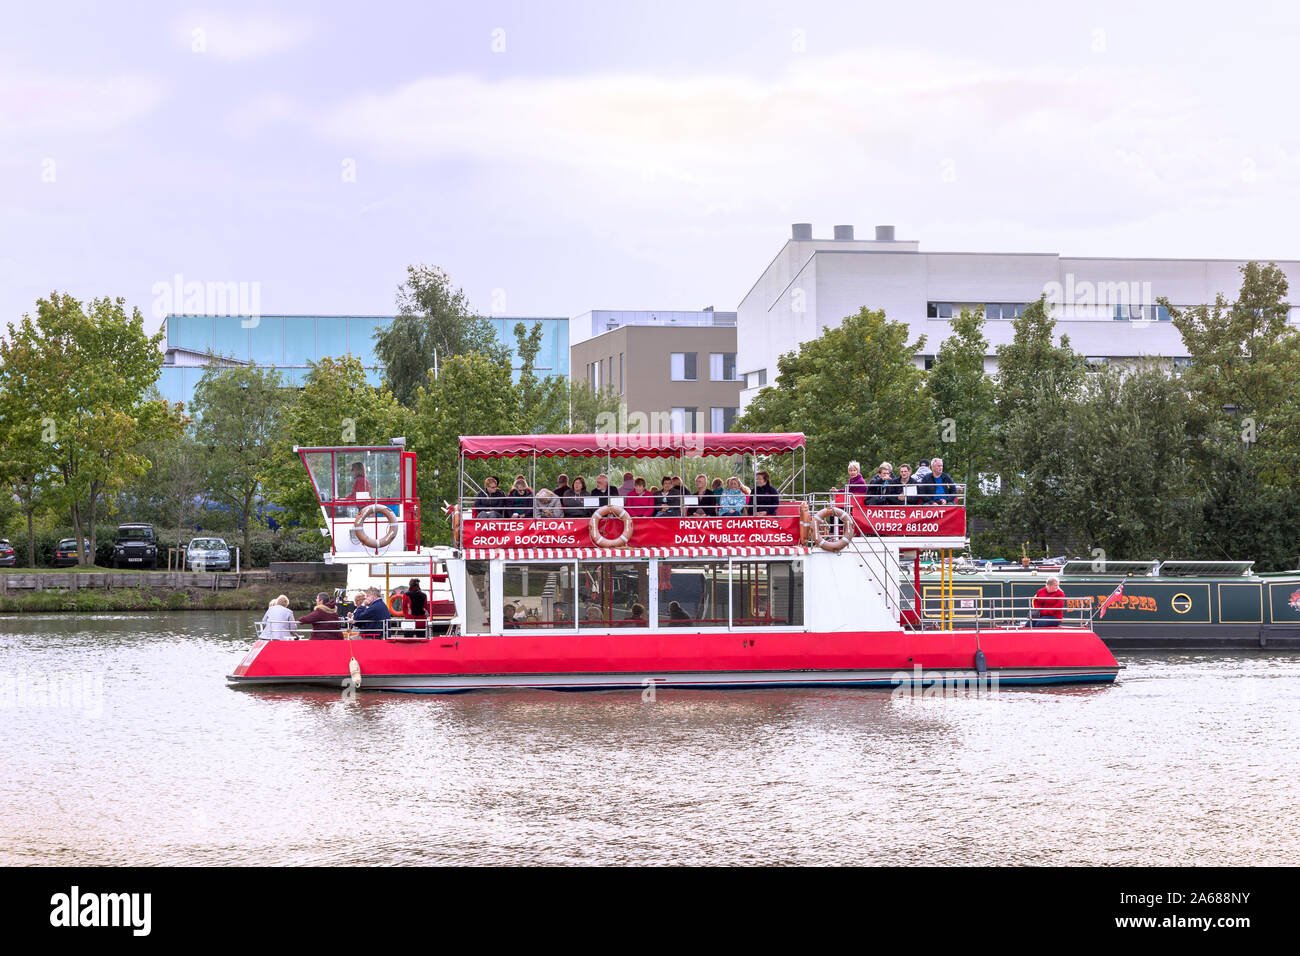 Pleasure boat Brayford Belle takes tourists around Brayford Pool and neighbouring waterways on the River Witham in Lincoln UK Stock Photo